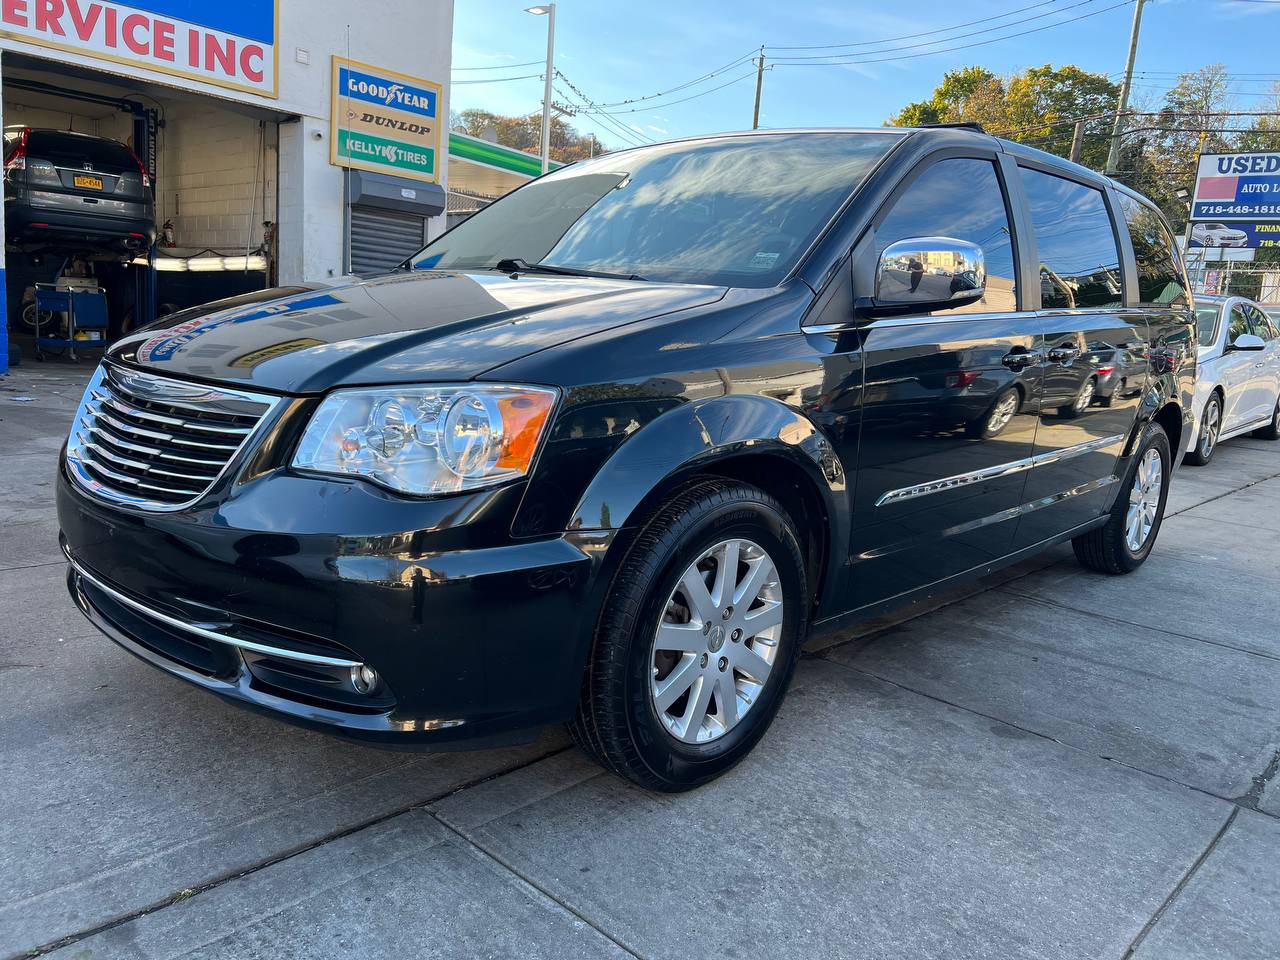 Used Car - 2011 Chrysler Town & Country Touring for Sale in Staten Island, NY